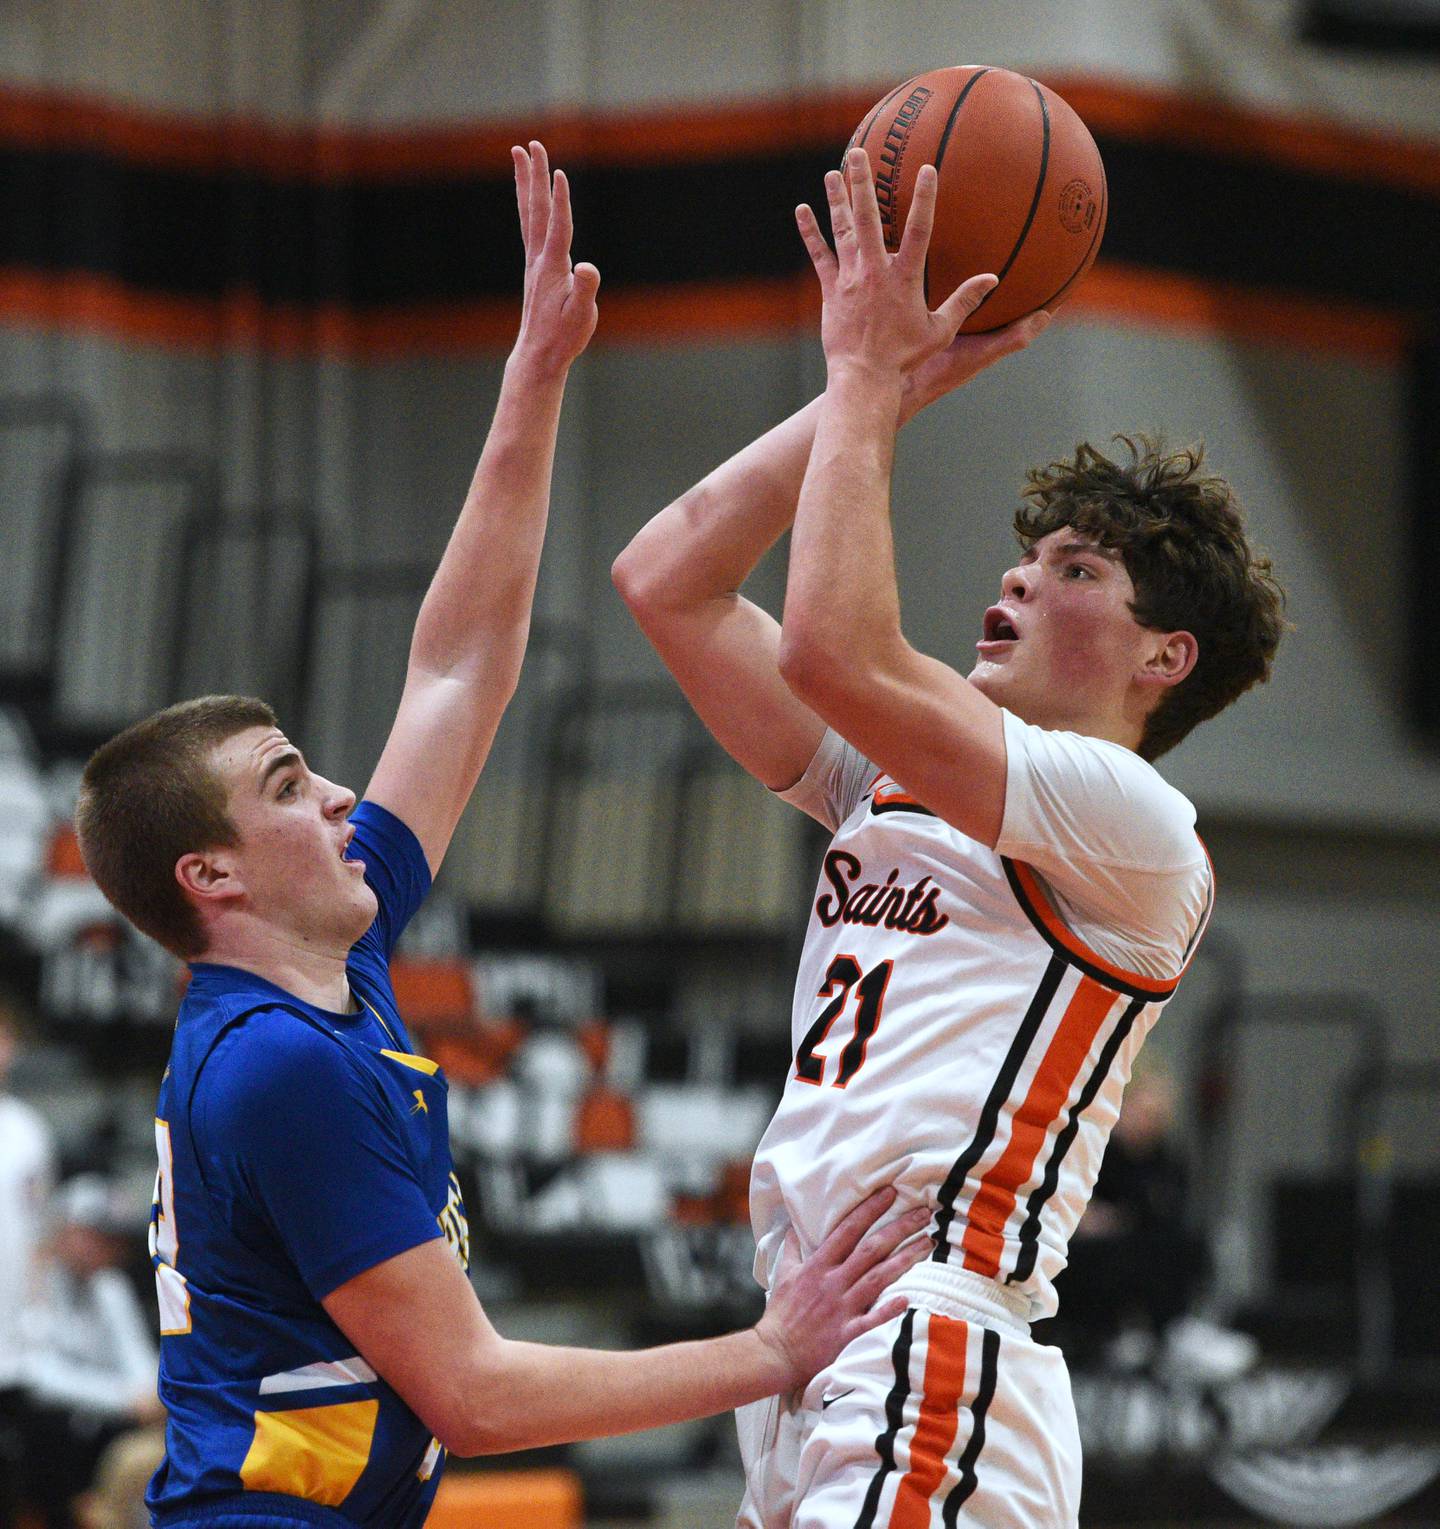 St. Charles East's Jacob Vrankovich (21) takes a shot over Wheaton North's Ben Gillmar during Wednesday’s boys basketball game in St. Charles.